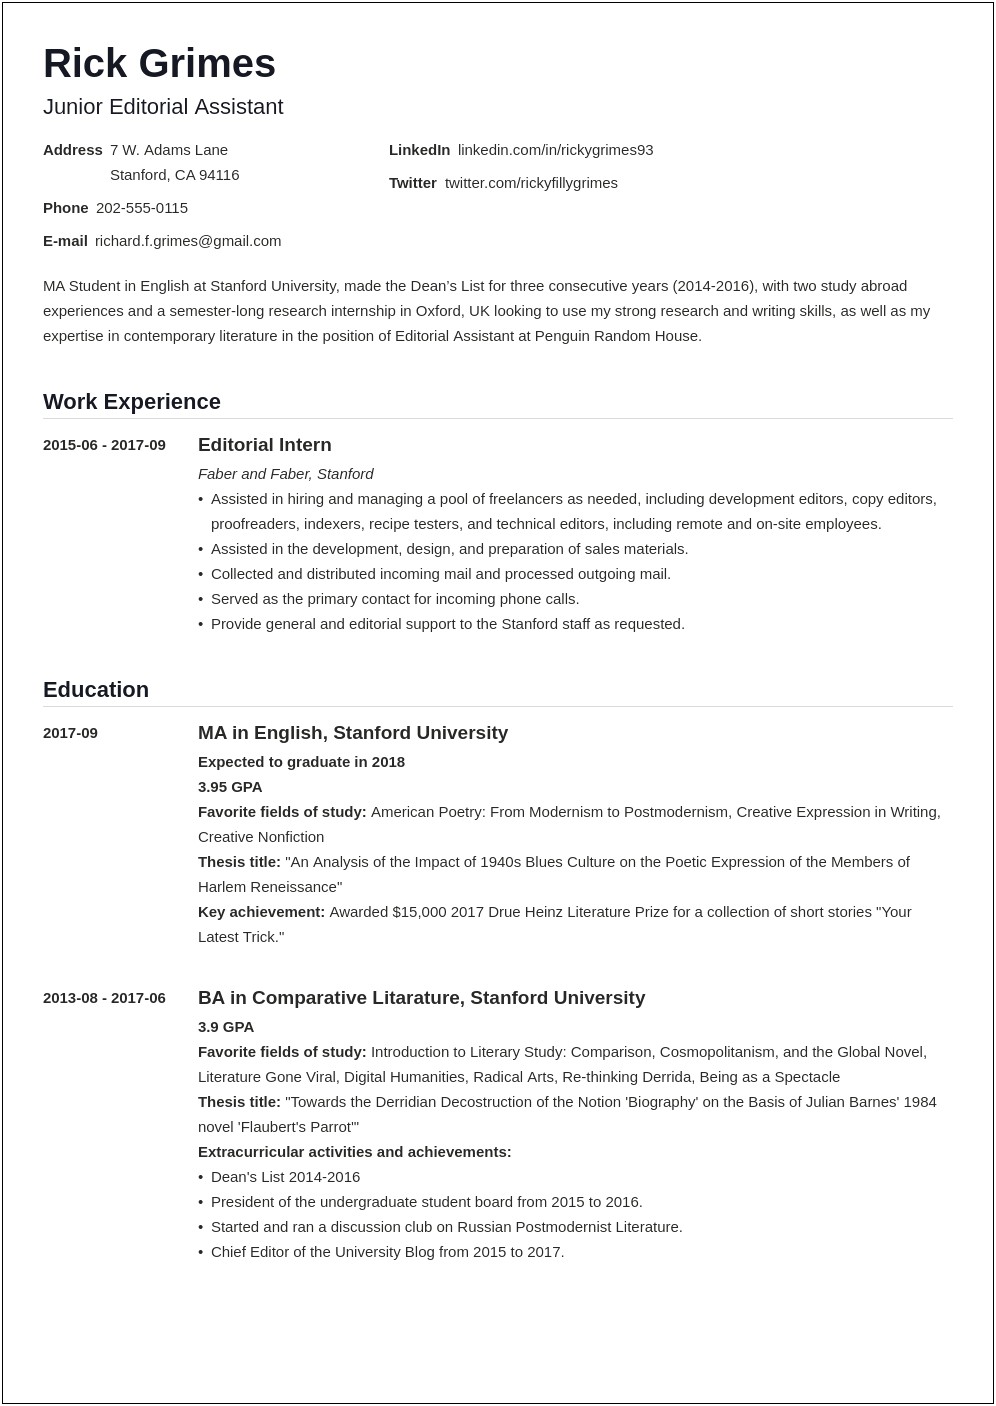 Where To Put Thesis Title In Resume Doc